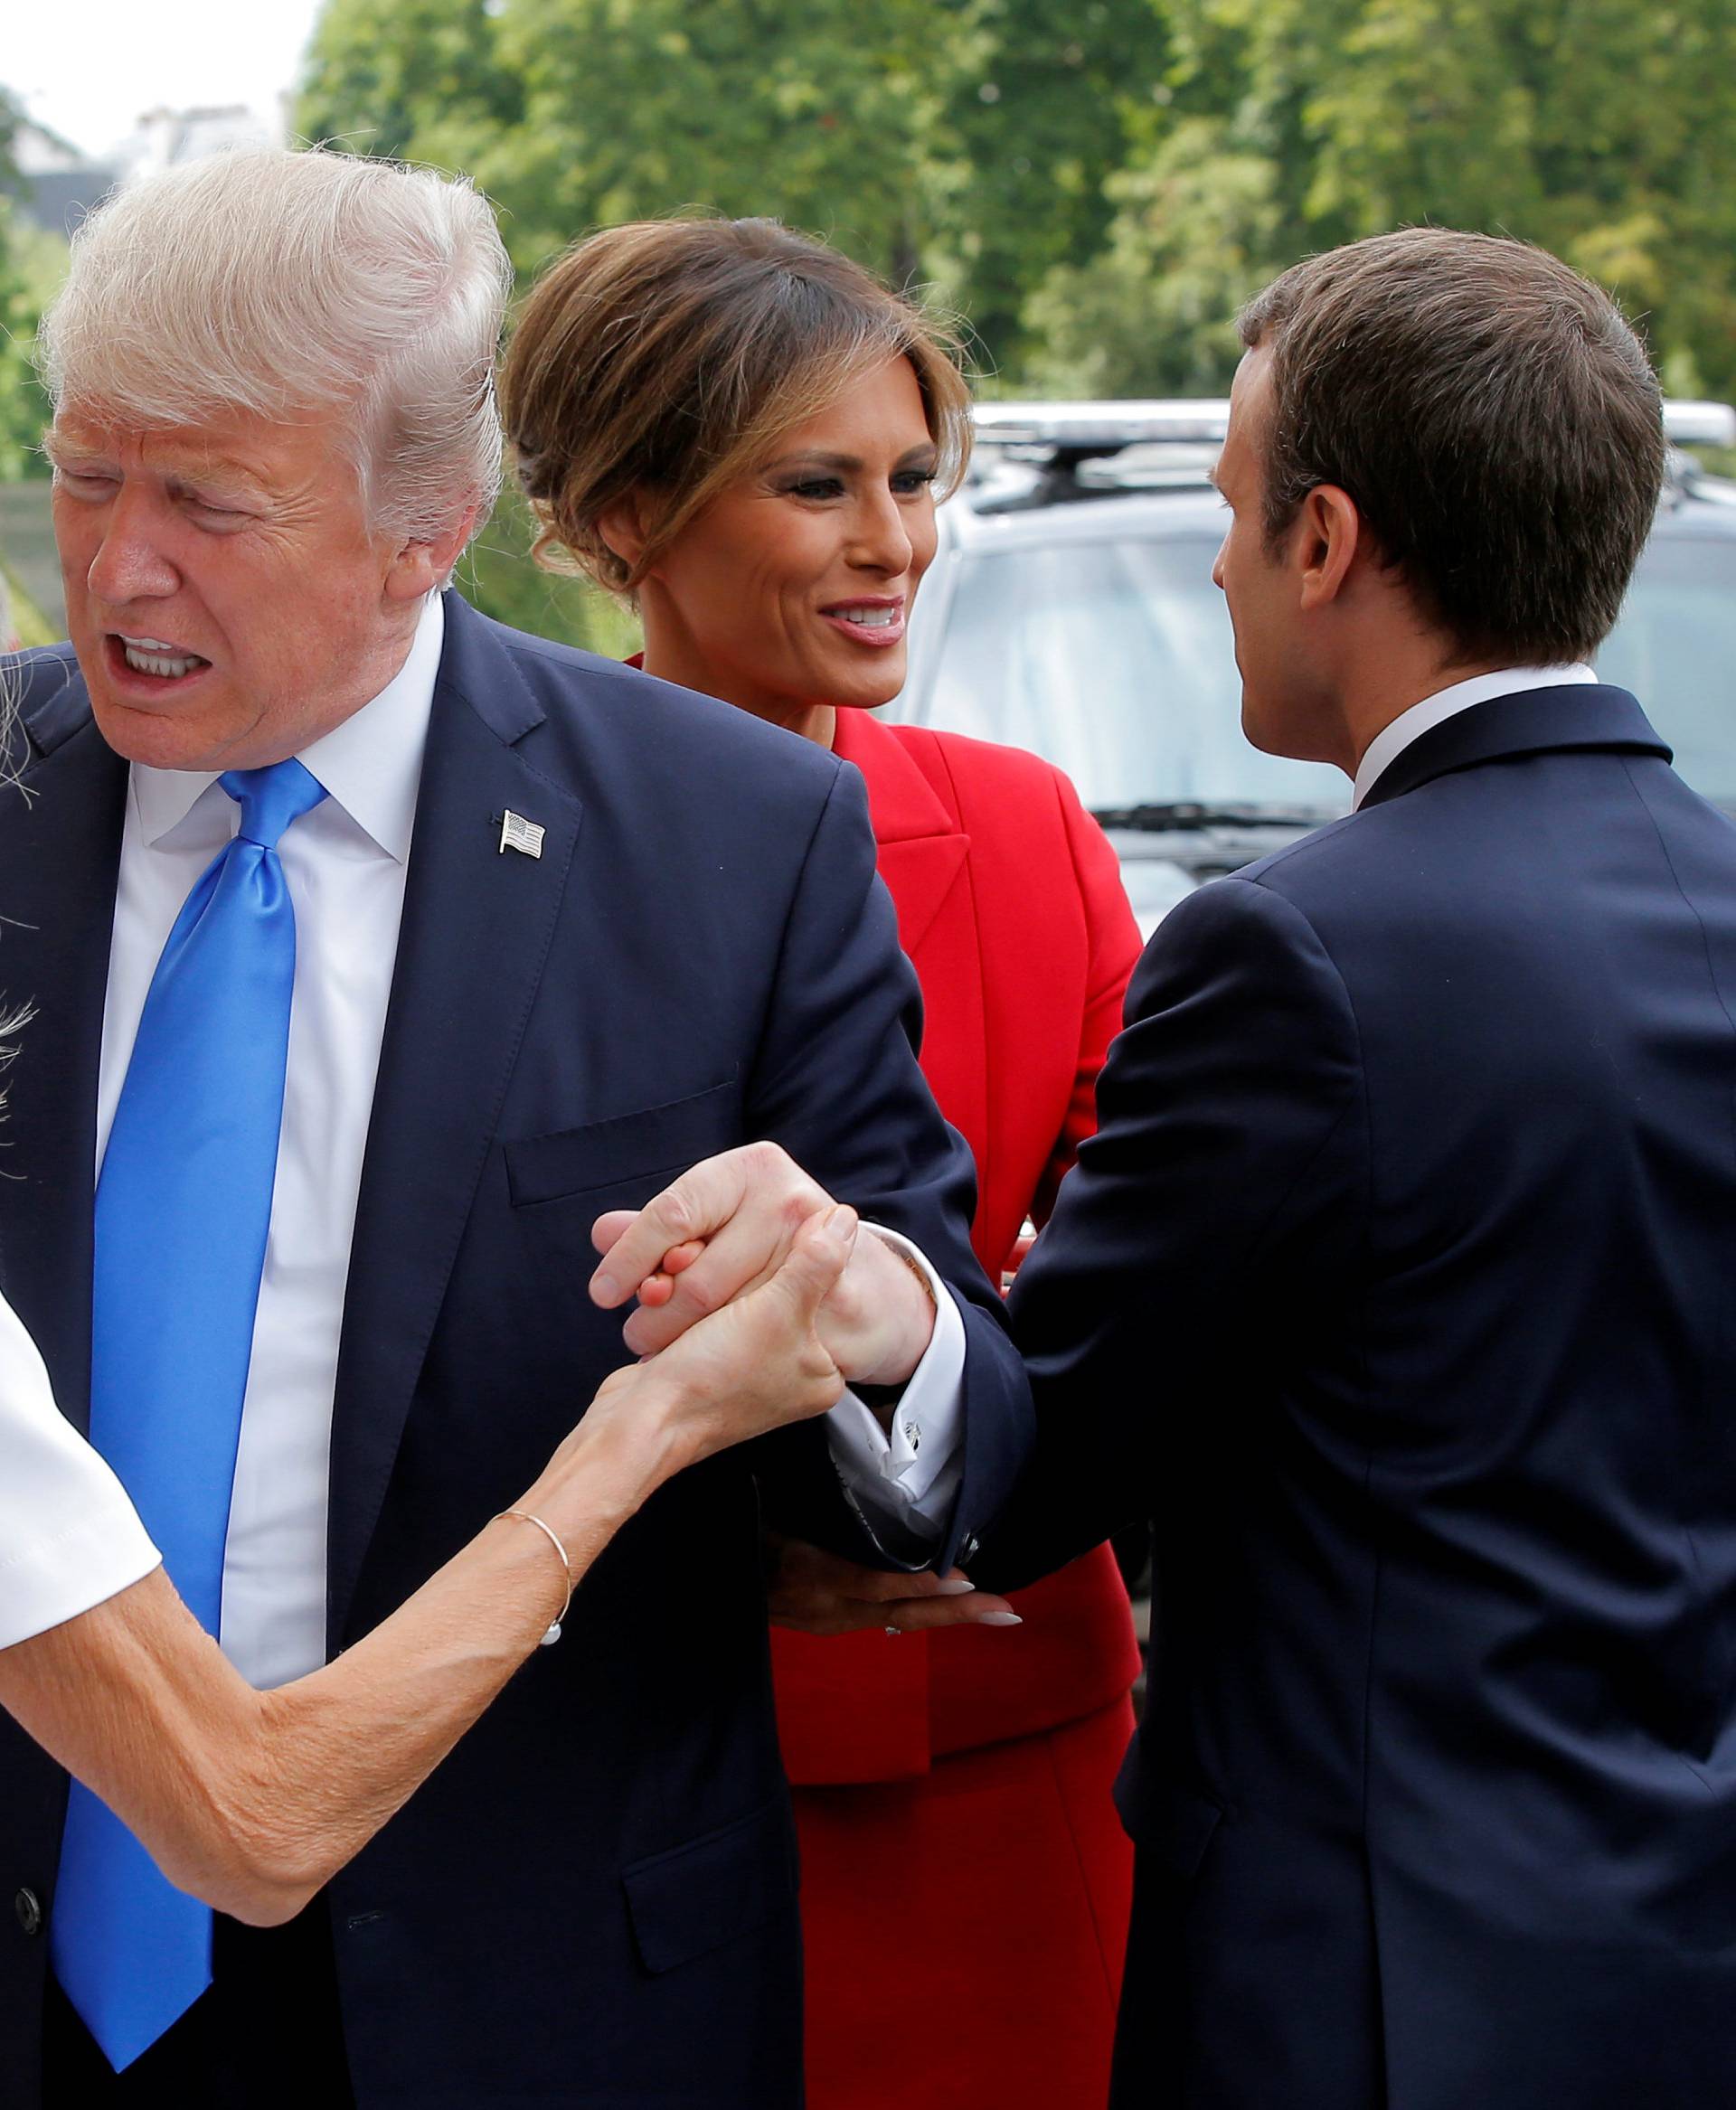 French President Emmanuel Macron greets US First Lady Melania Trump while his wife Brigitte Macron welcomes US President Donald Trump at Les Invalides museum in Paris